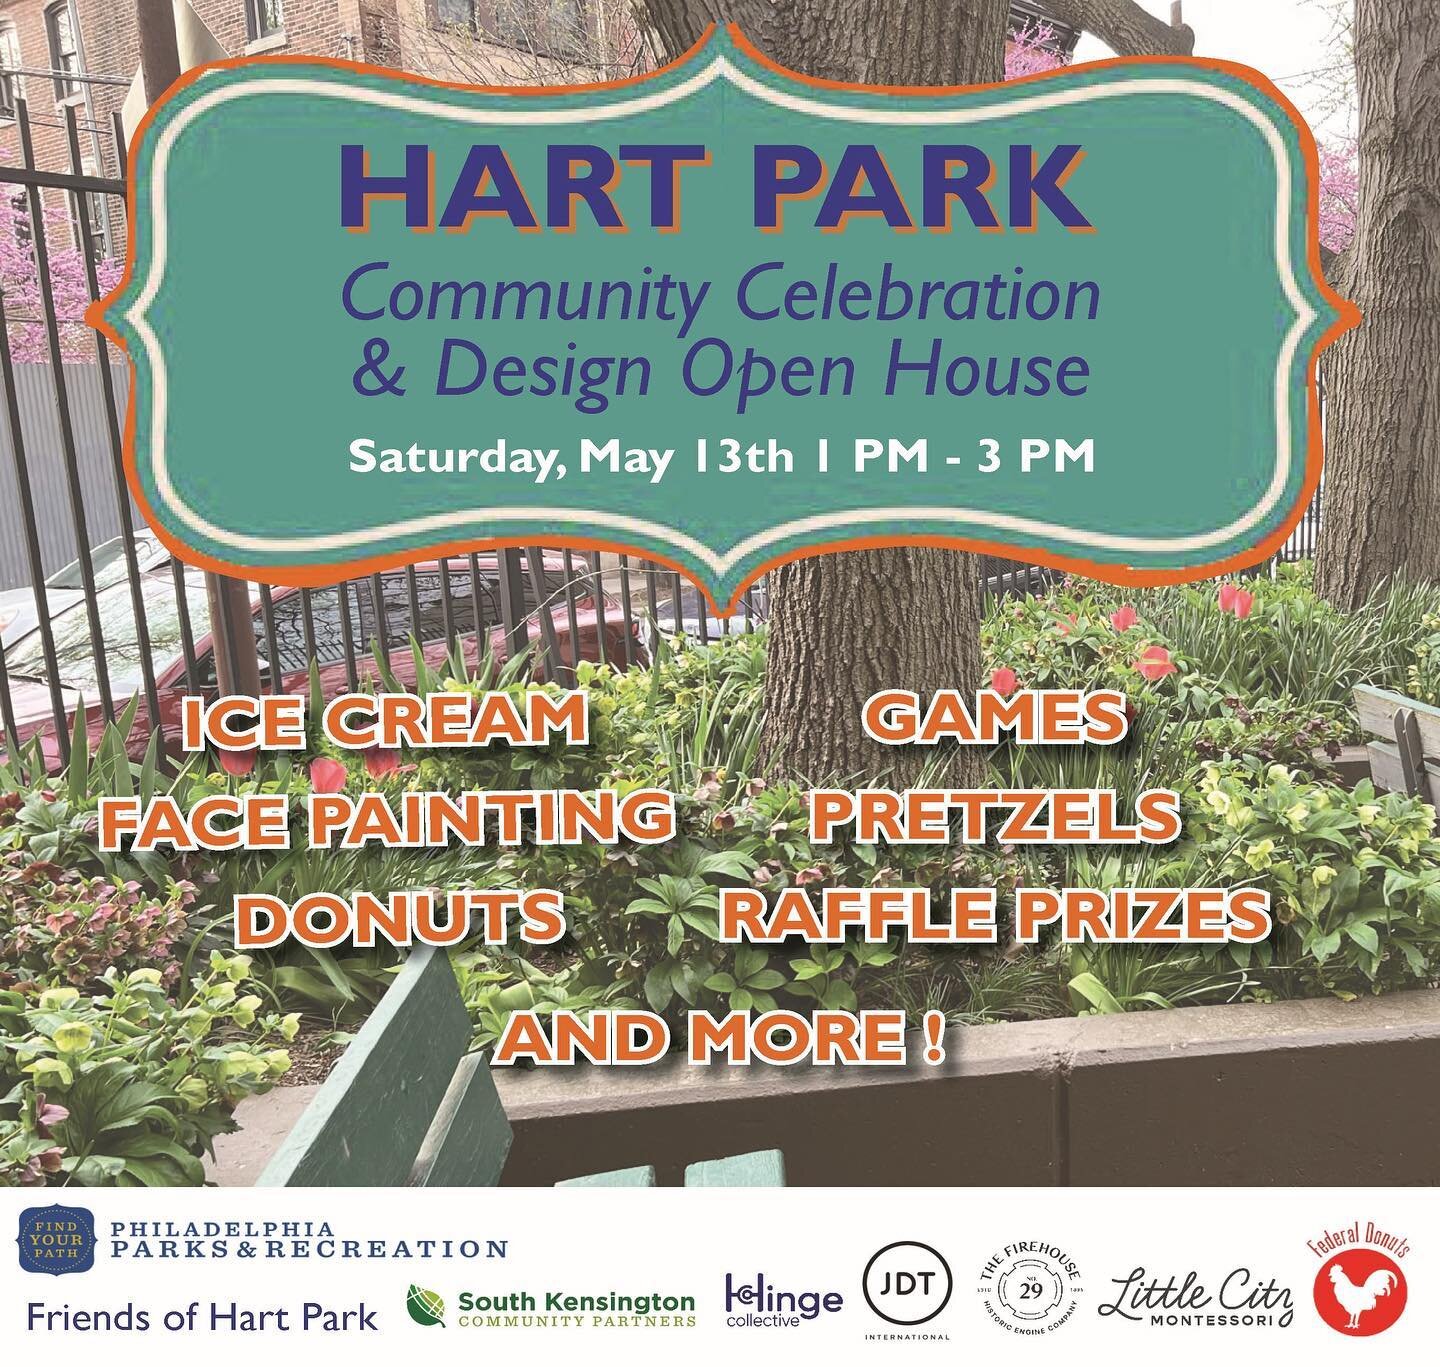 Join us tomorrow at Hart Park to share your ideas on how best to redesign this neighborhood gem! Meet your neighbors, learn how to be more involved and enjoy an afternoon of fun and games! 

Come early to join the Love Your Park clean-up 10am - 12pm.